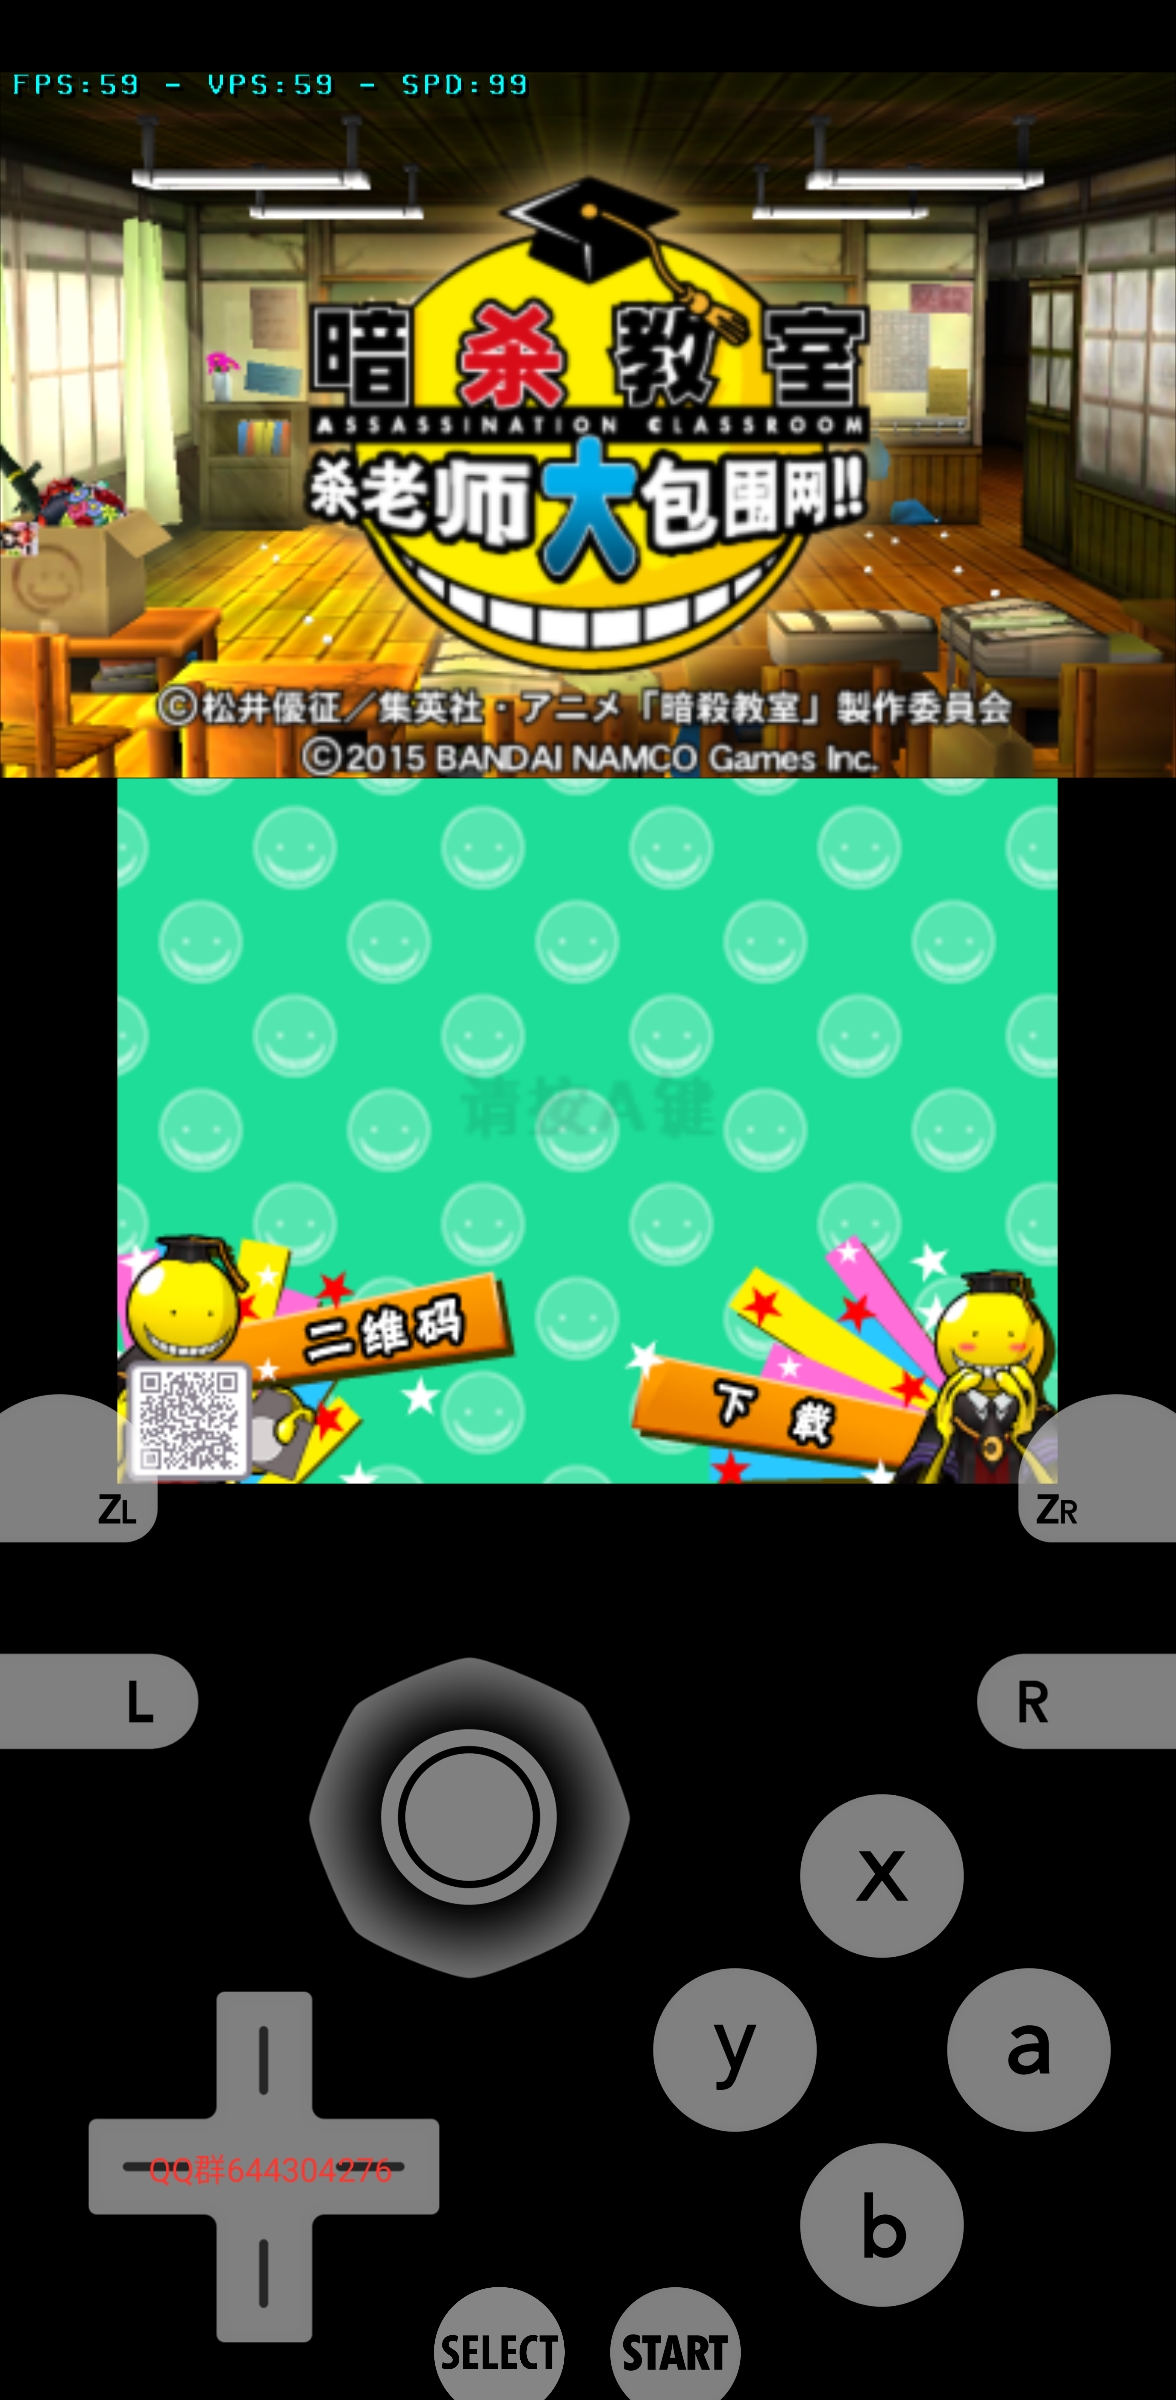 Assassination Classroom Crack edition (Apocalypse available)(3DS porting)